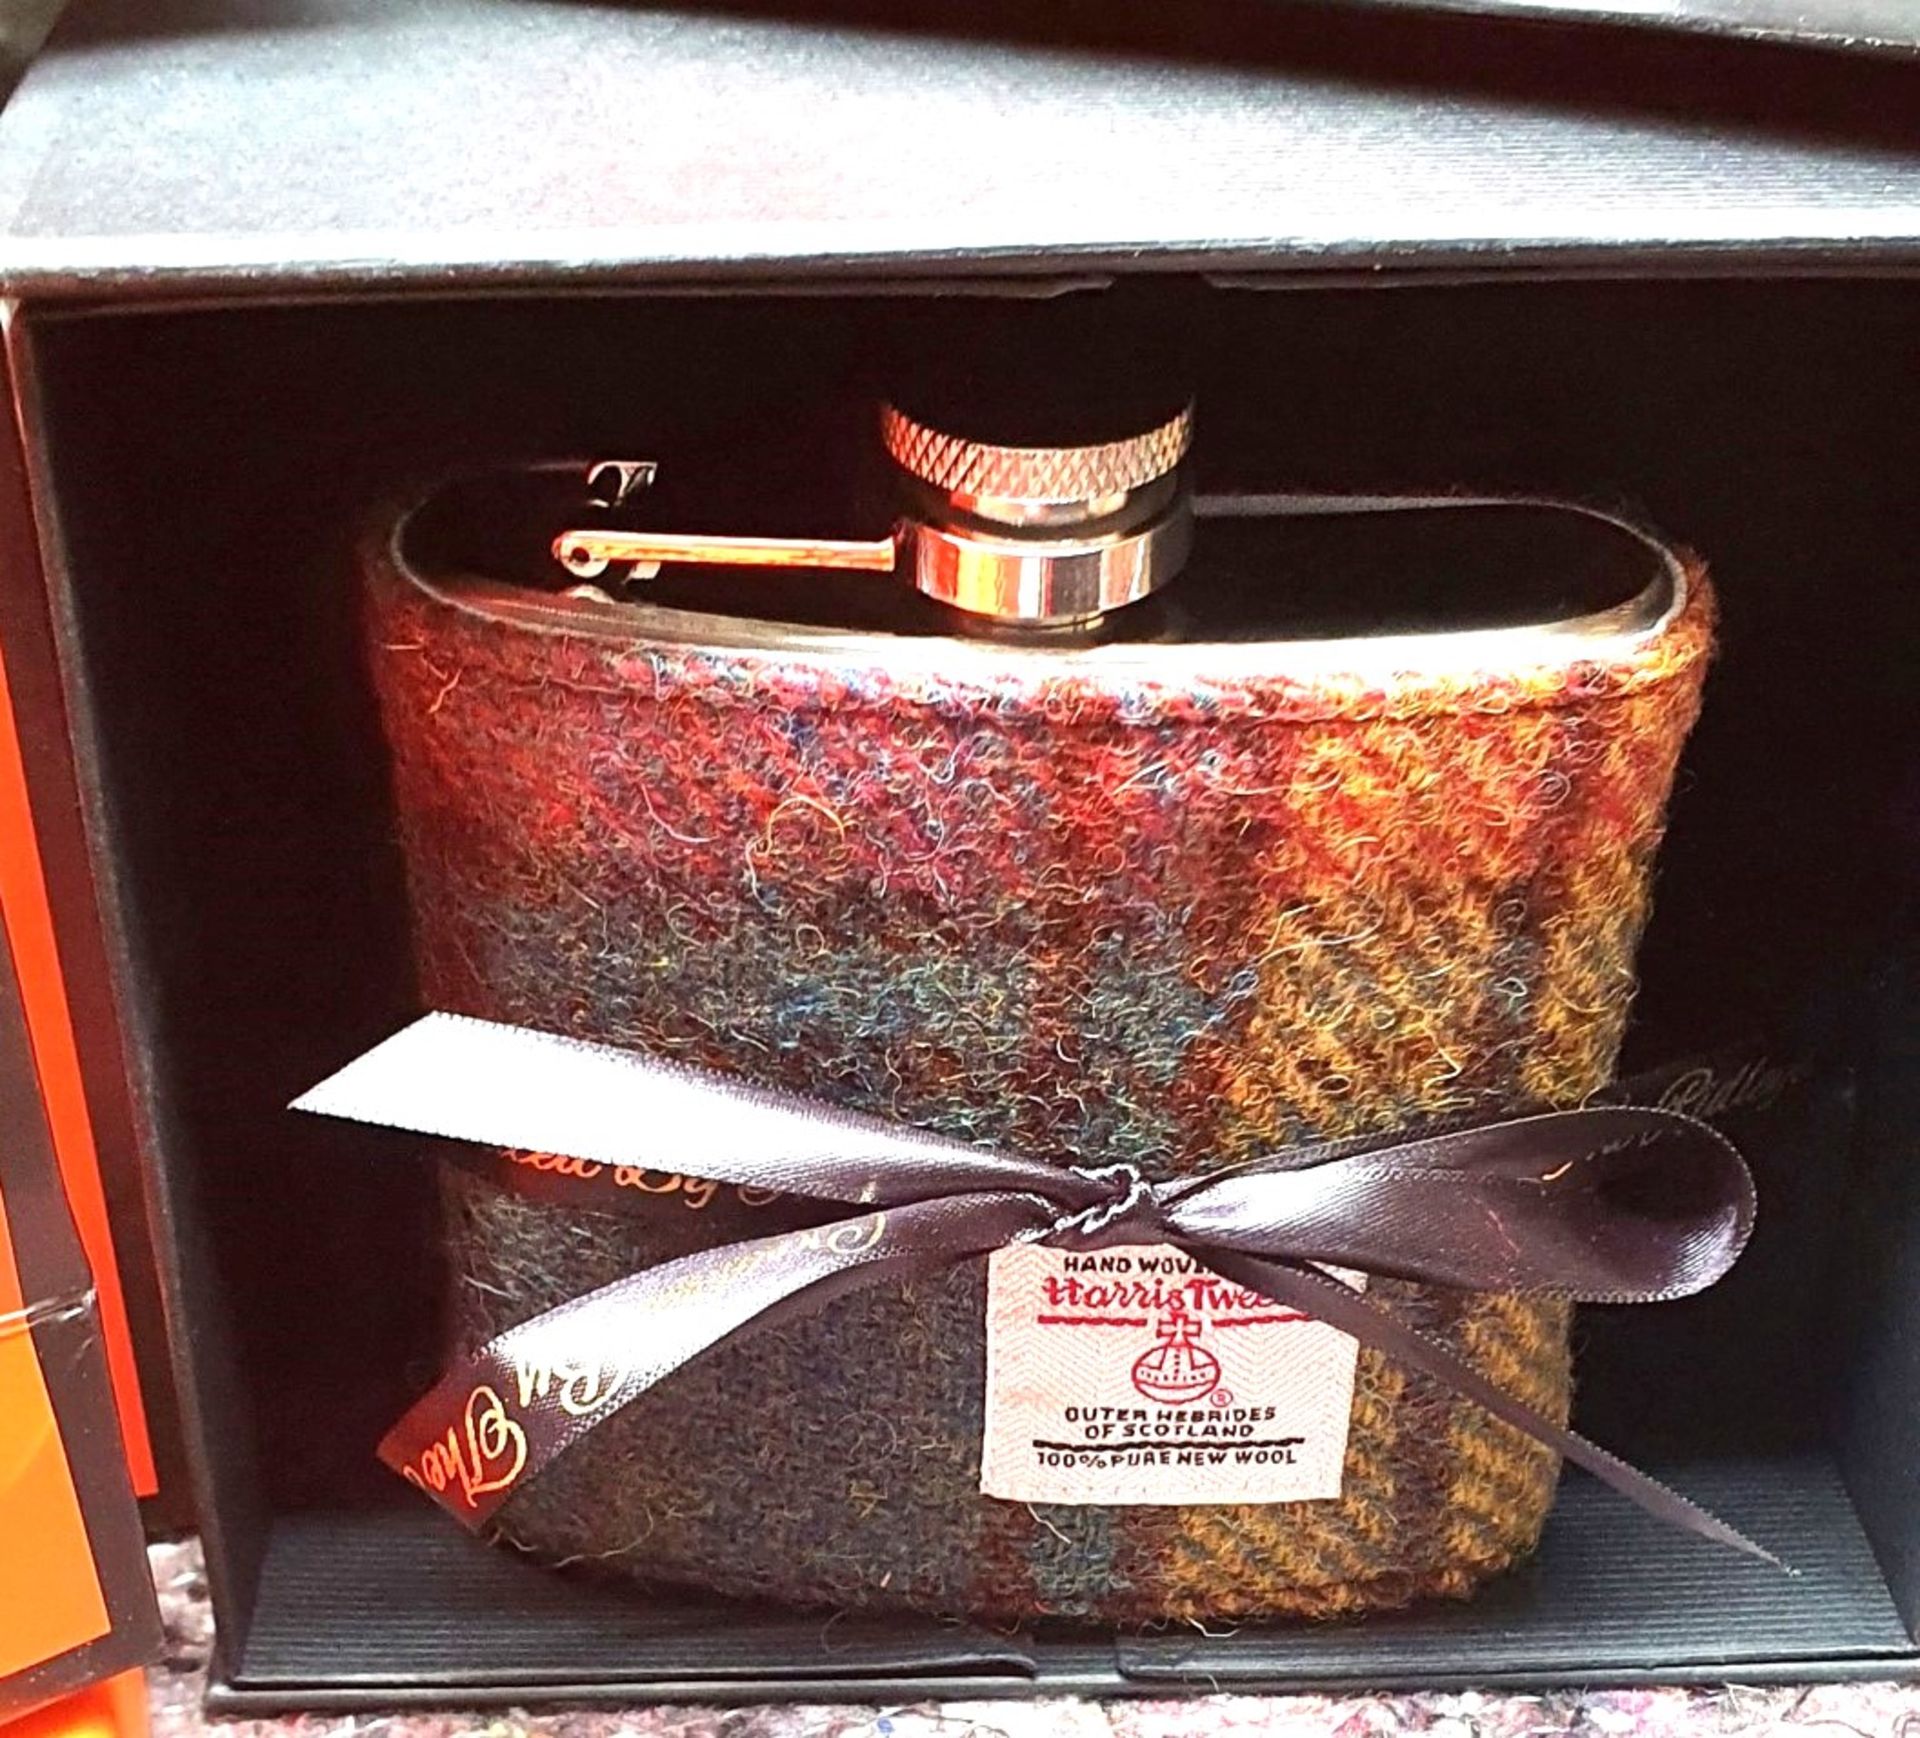 1 x Ridleys Handwoven Harris Tweed Hip Flask in Gift Box - New  - Ref: TCH223 - CL840 - Location: - Image 3 of 3